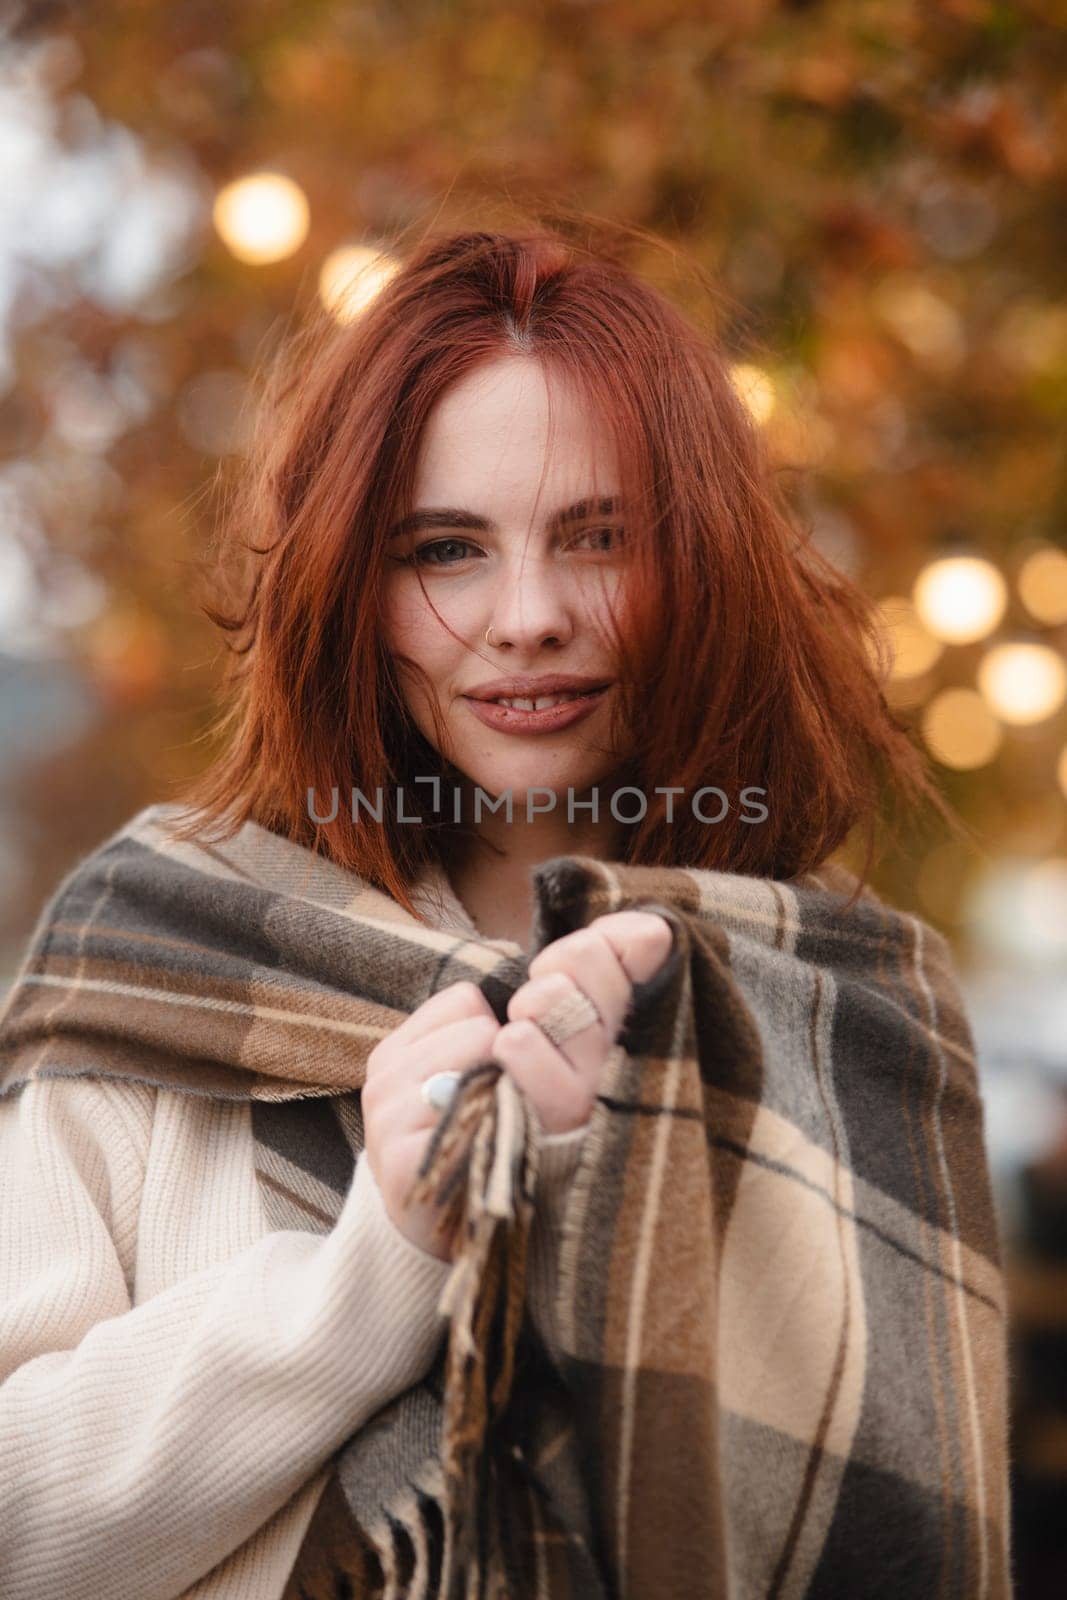 A spirited red-haired girl radiating hippie energy on a cool autumn day. by teksomolika